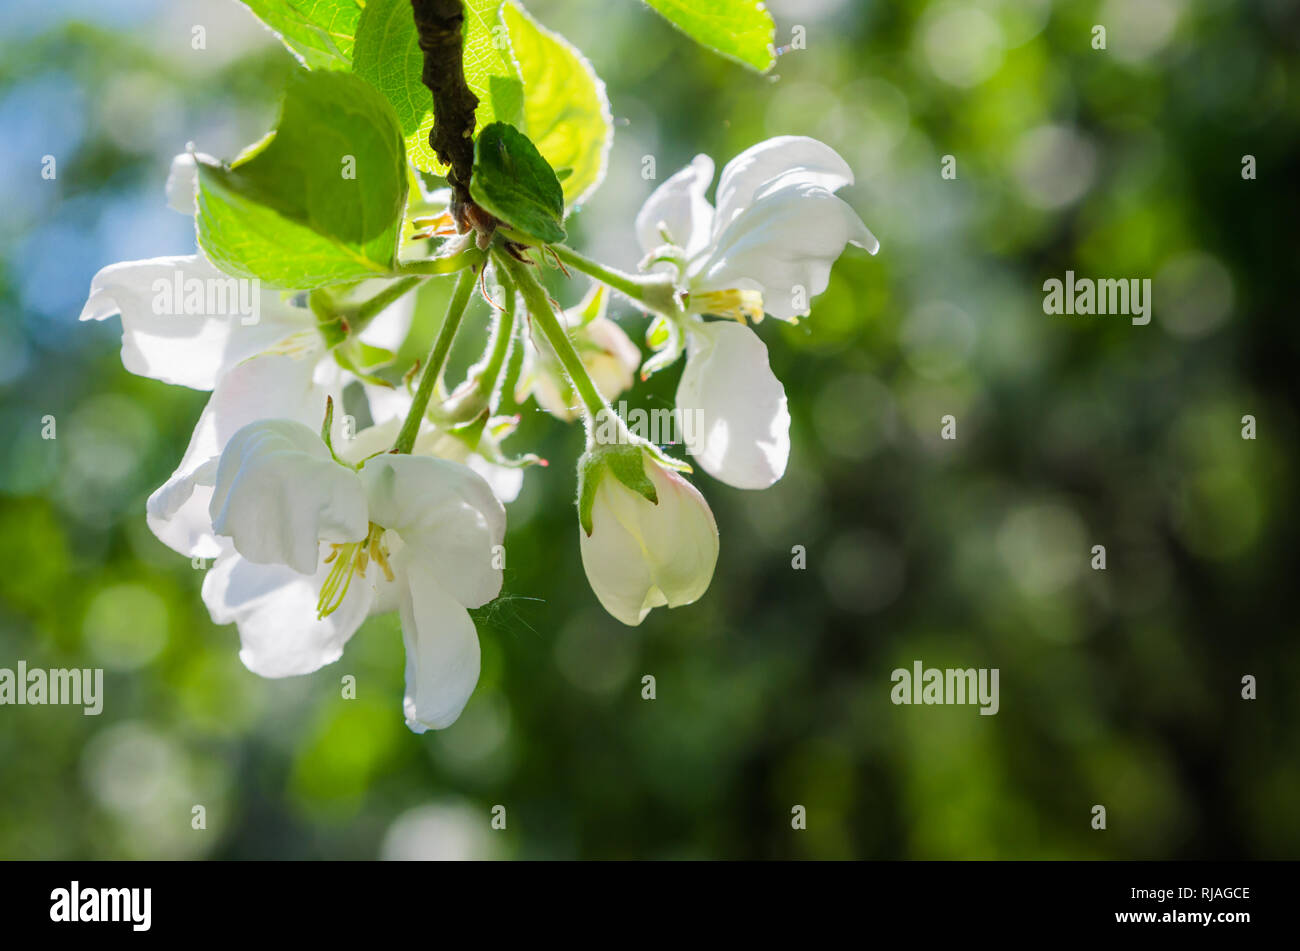 Branch of blossoming apple-tree Stock Photo